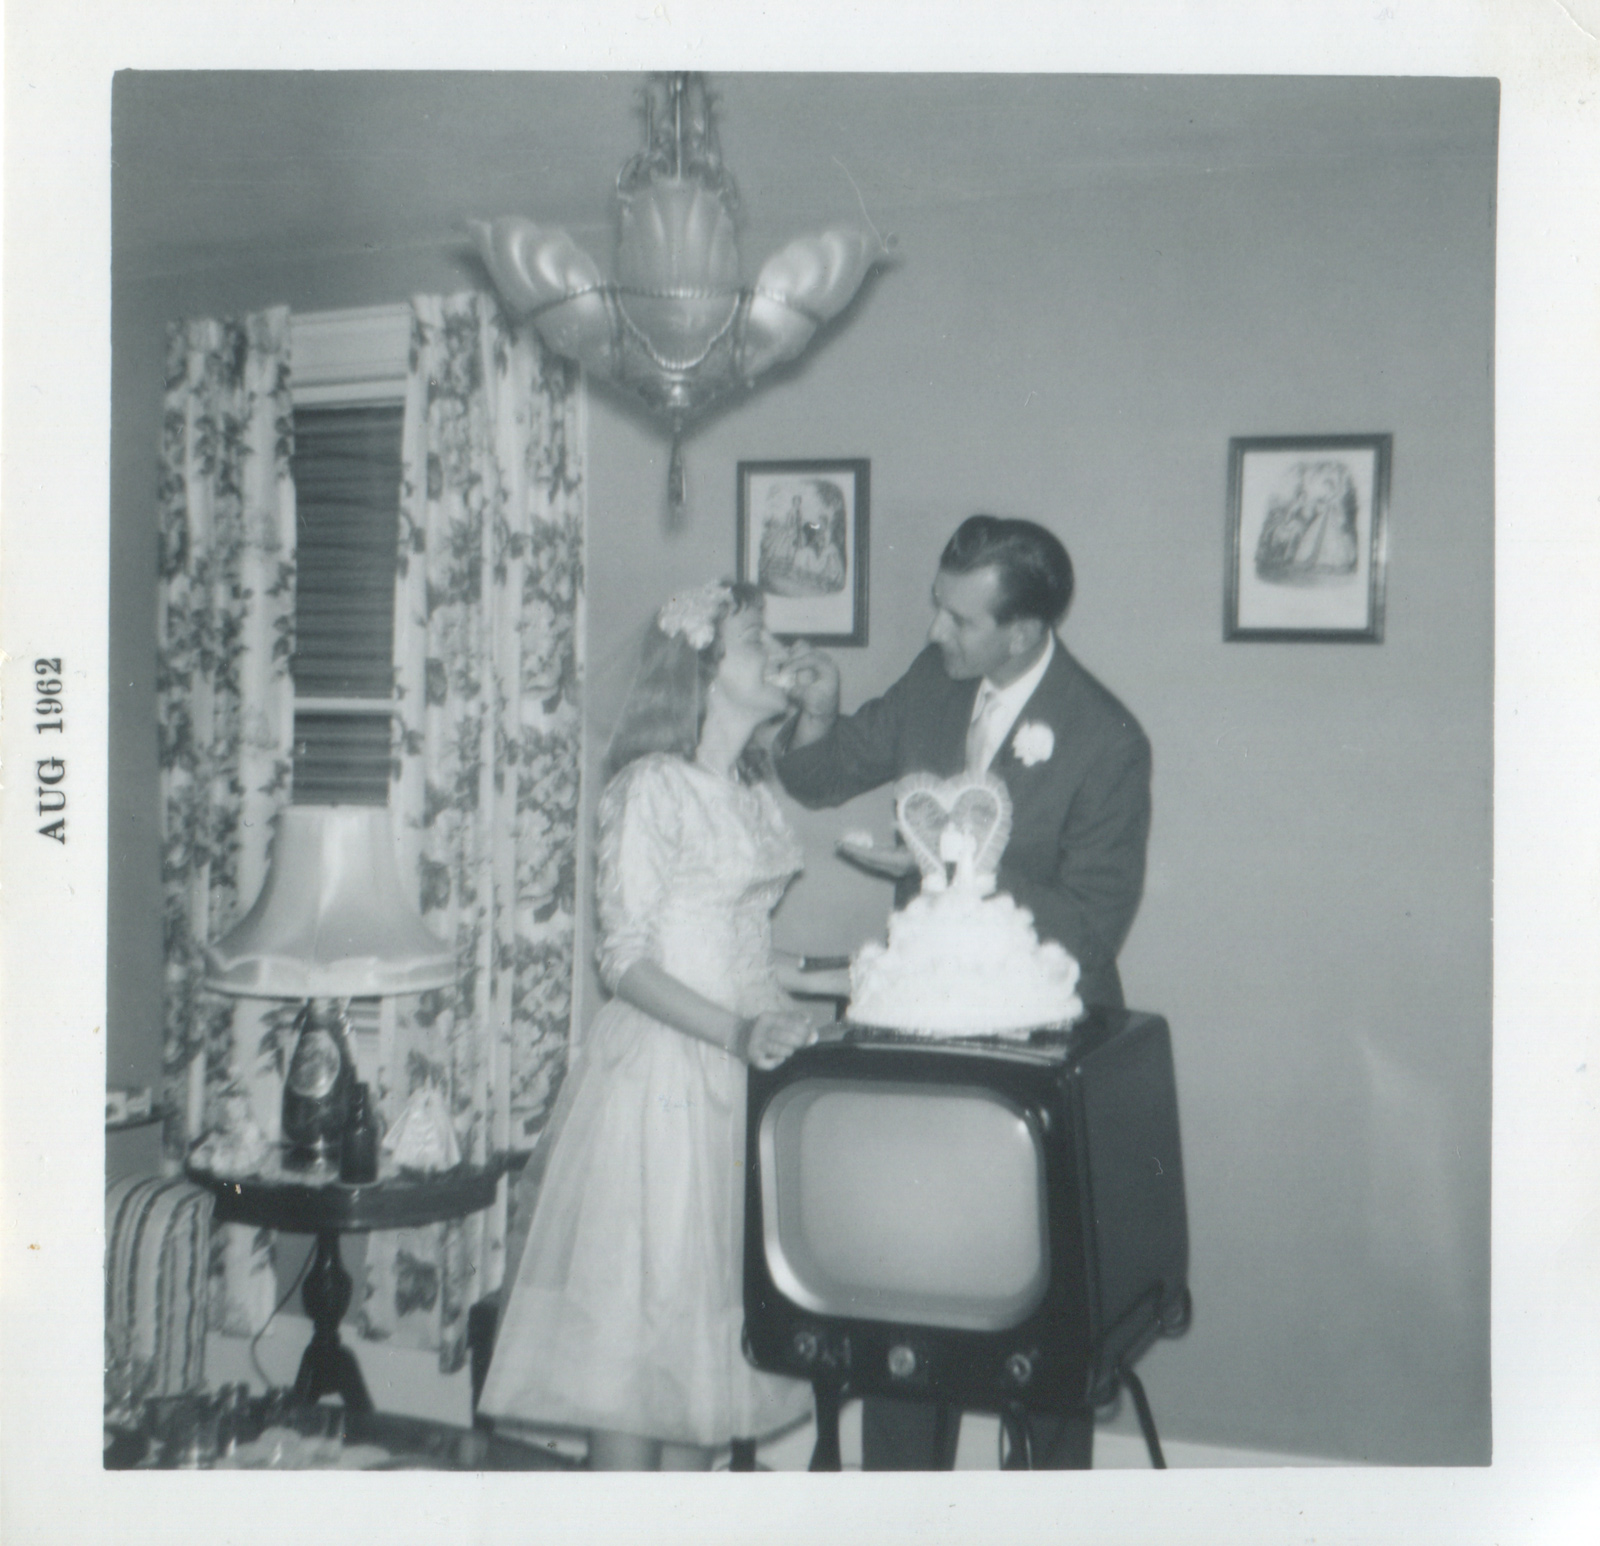 A just-married couple eating from a wedding cake atop a TV set